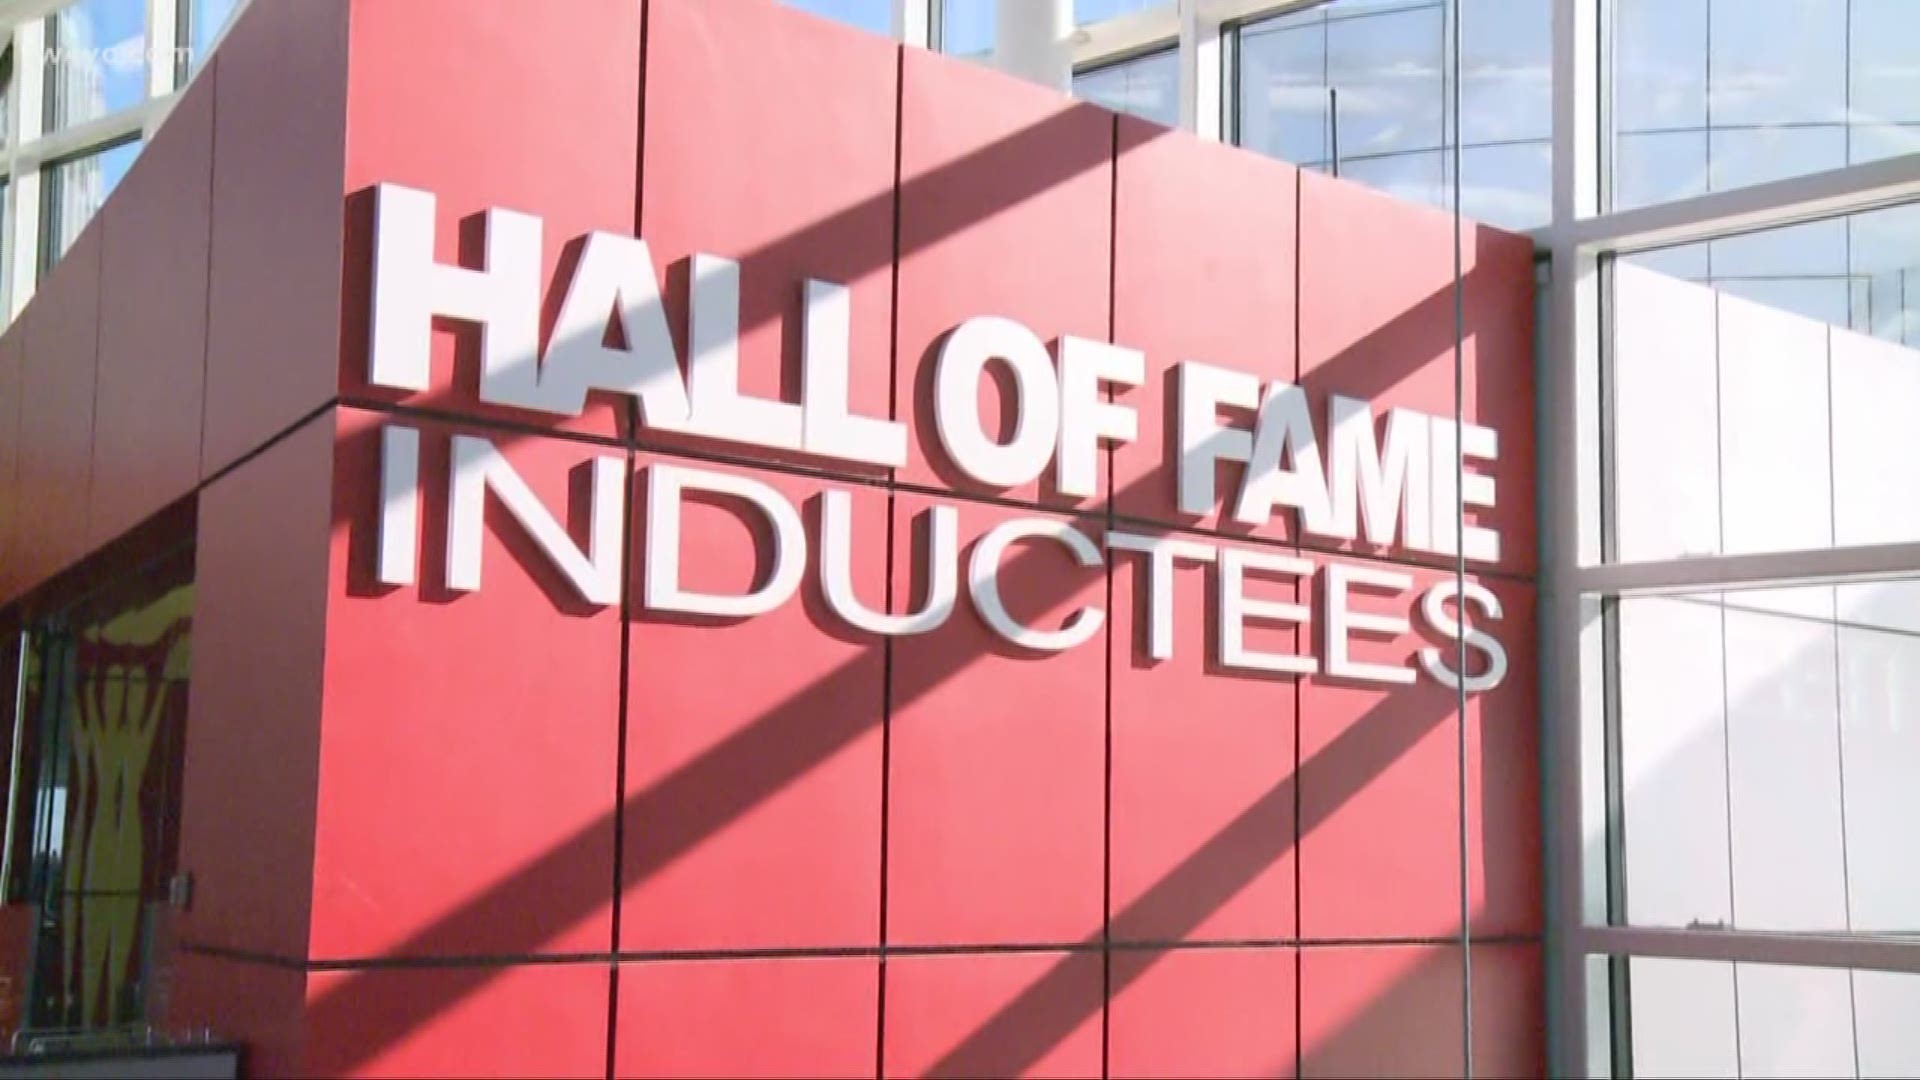 Rock and Roll Hall of Fame inductees announced